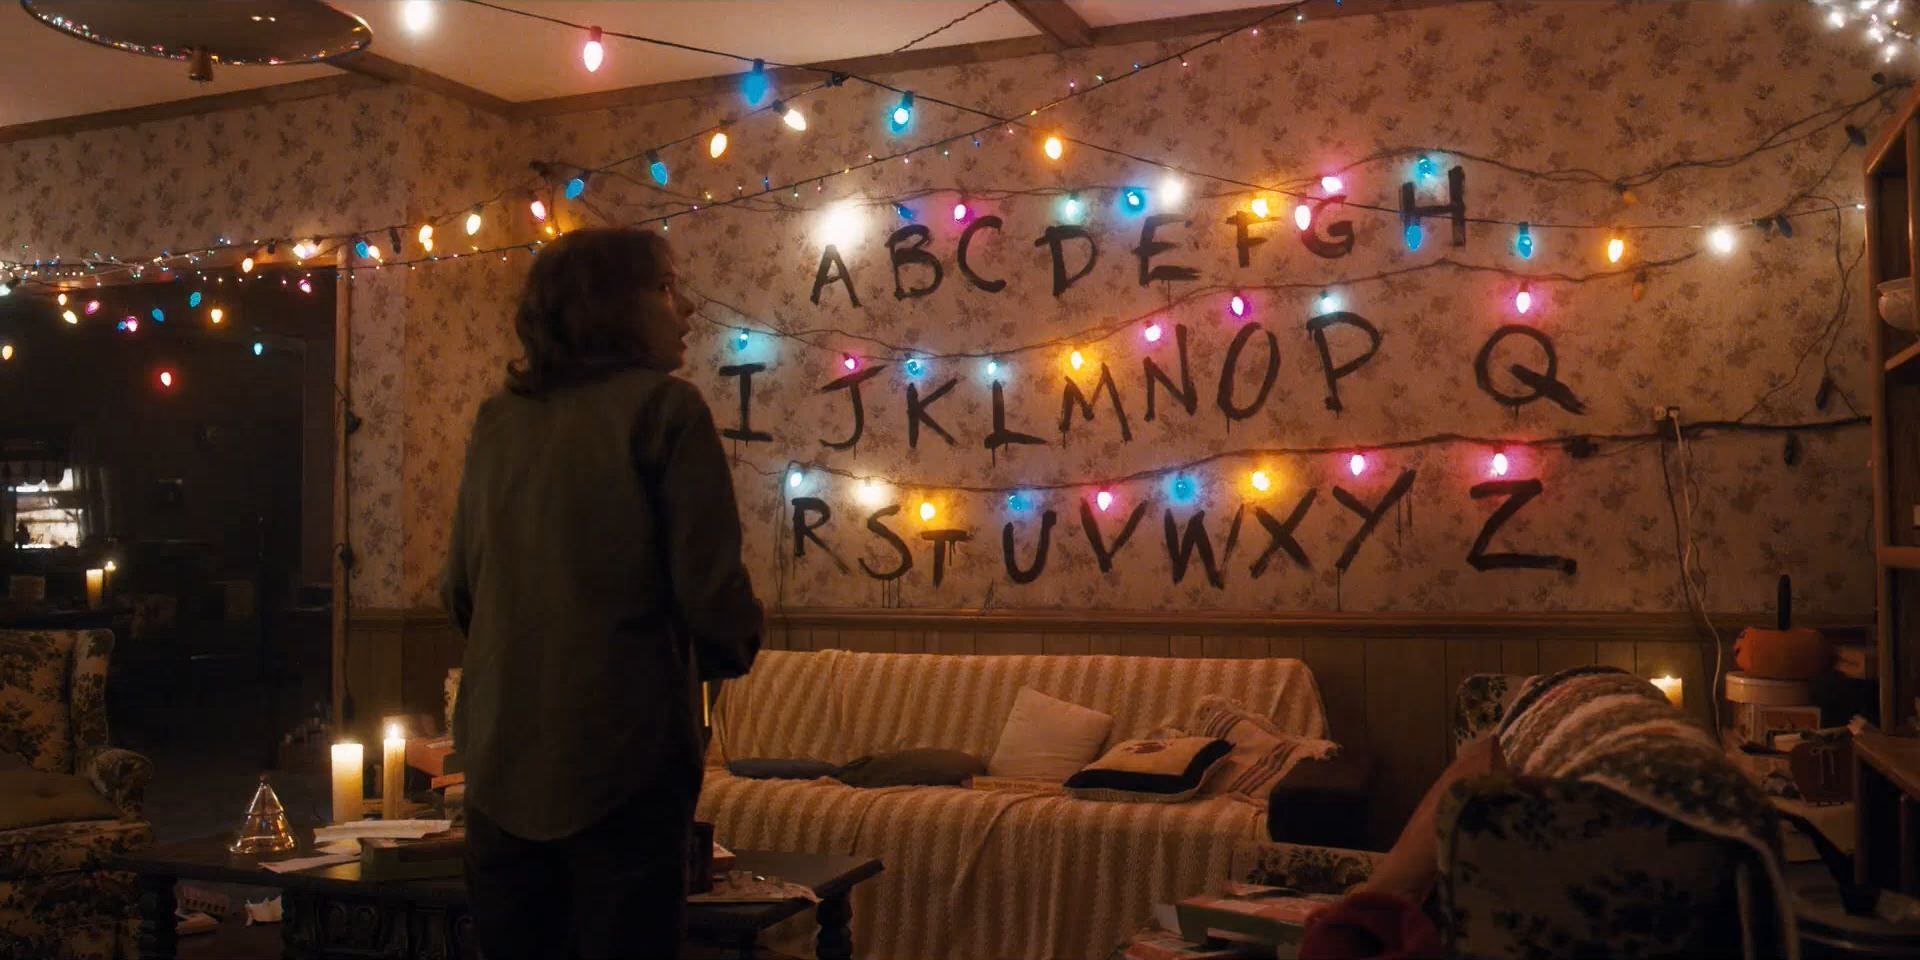 The Worst Thing Each Main Character From Stranger Things Has Done